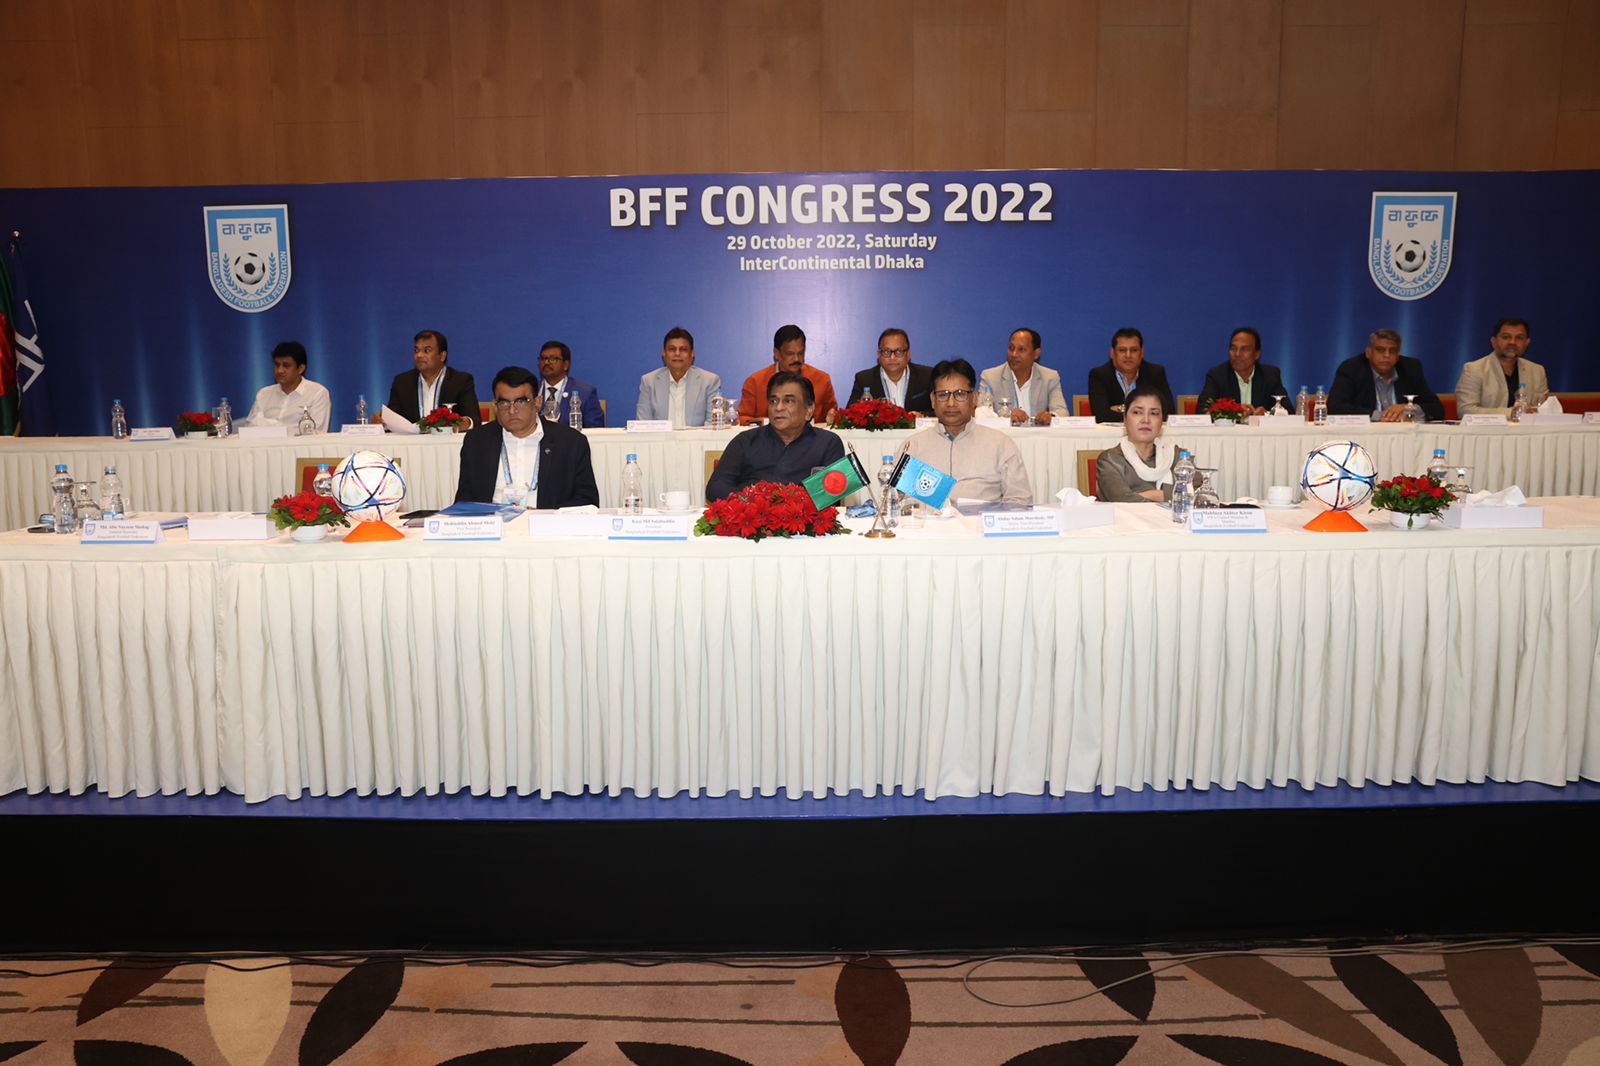 'BFF Annual General Meeting 2022' was held today